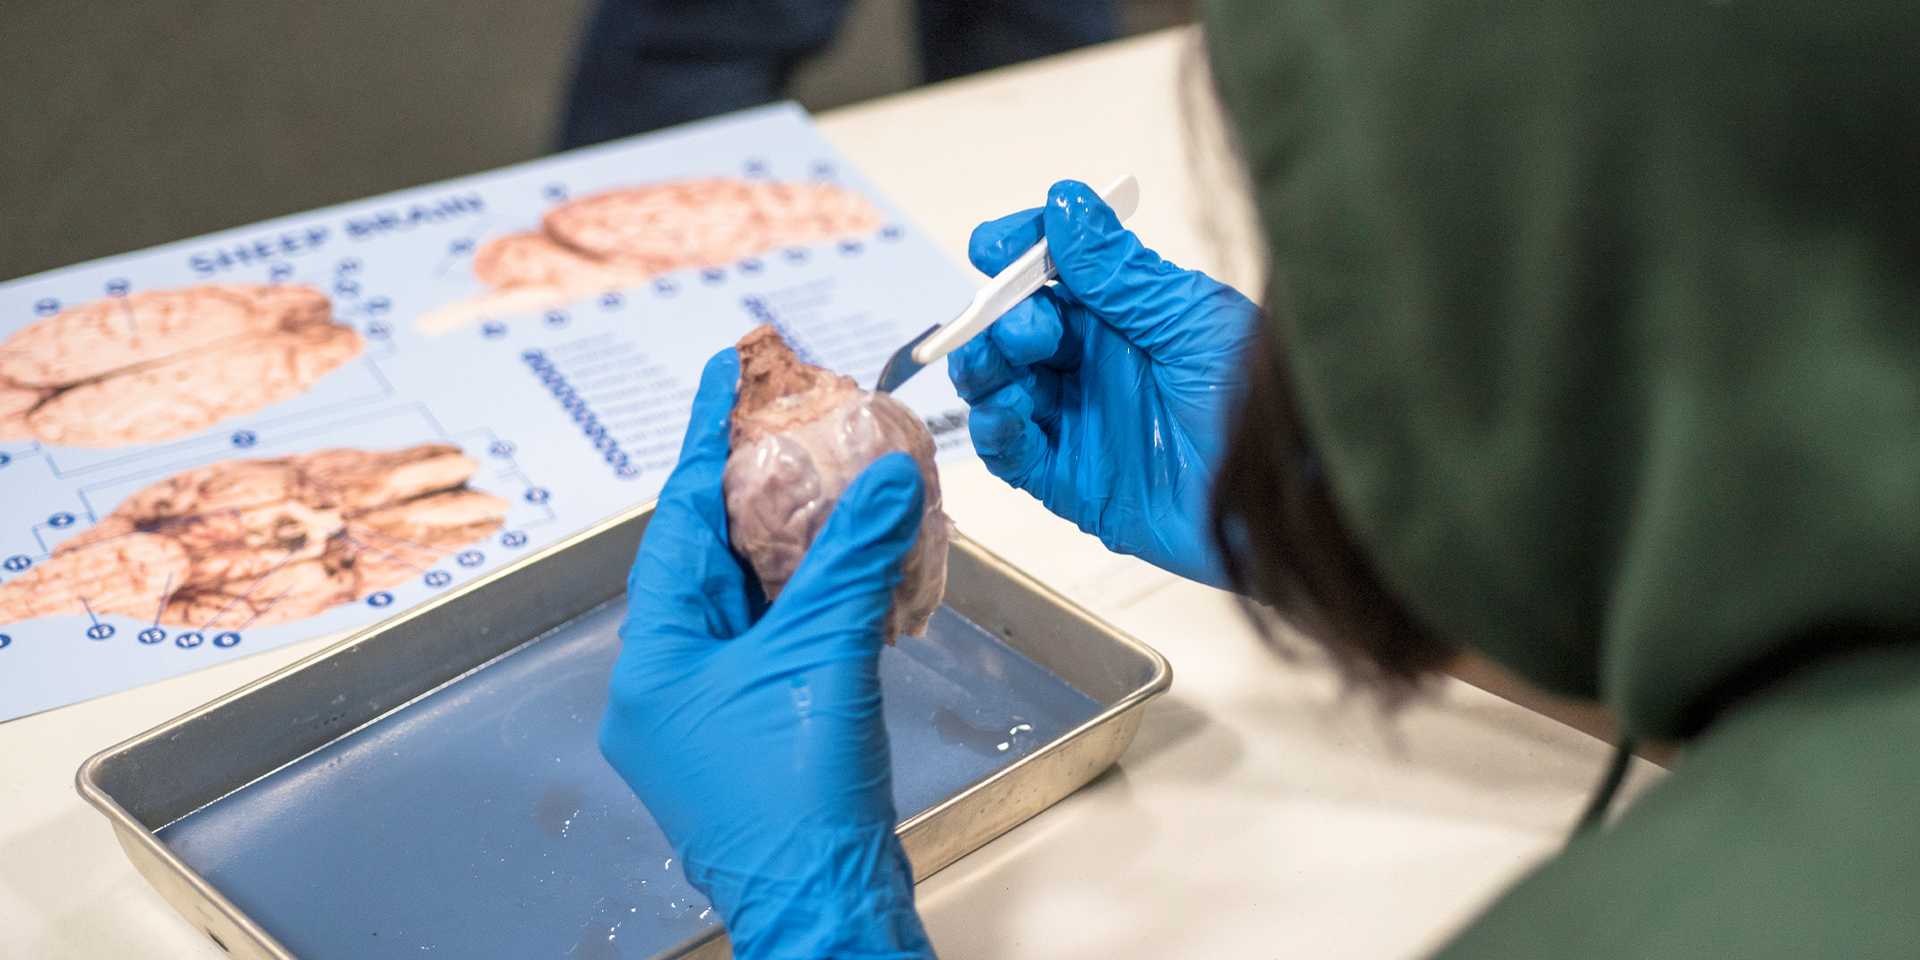 Student in blue gloves dissecting sheep's brain